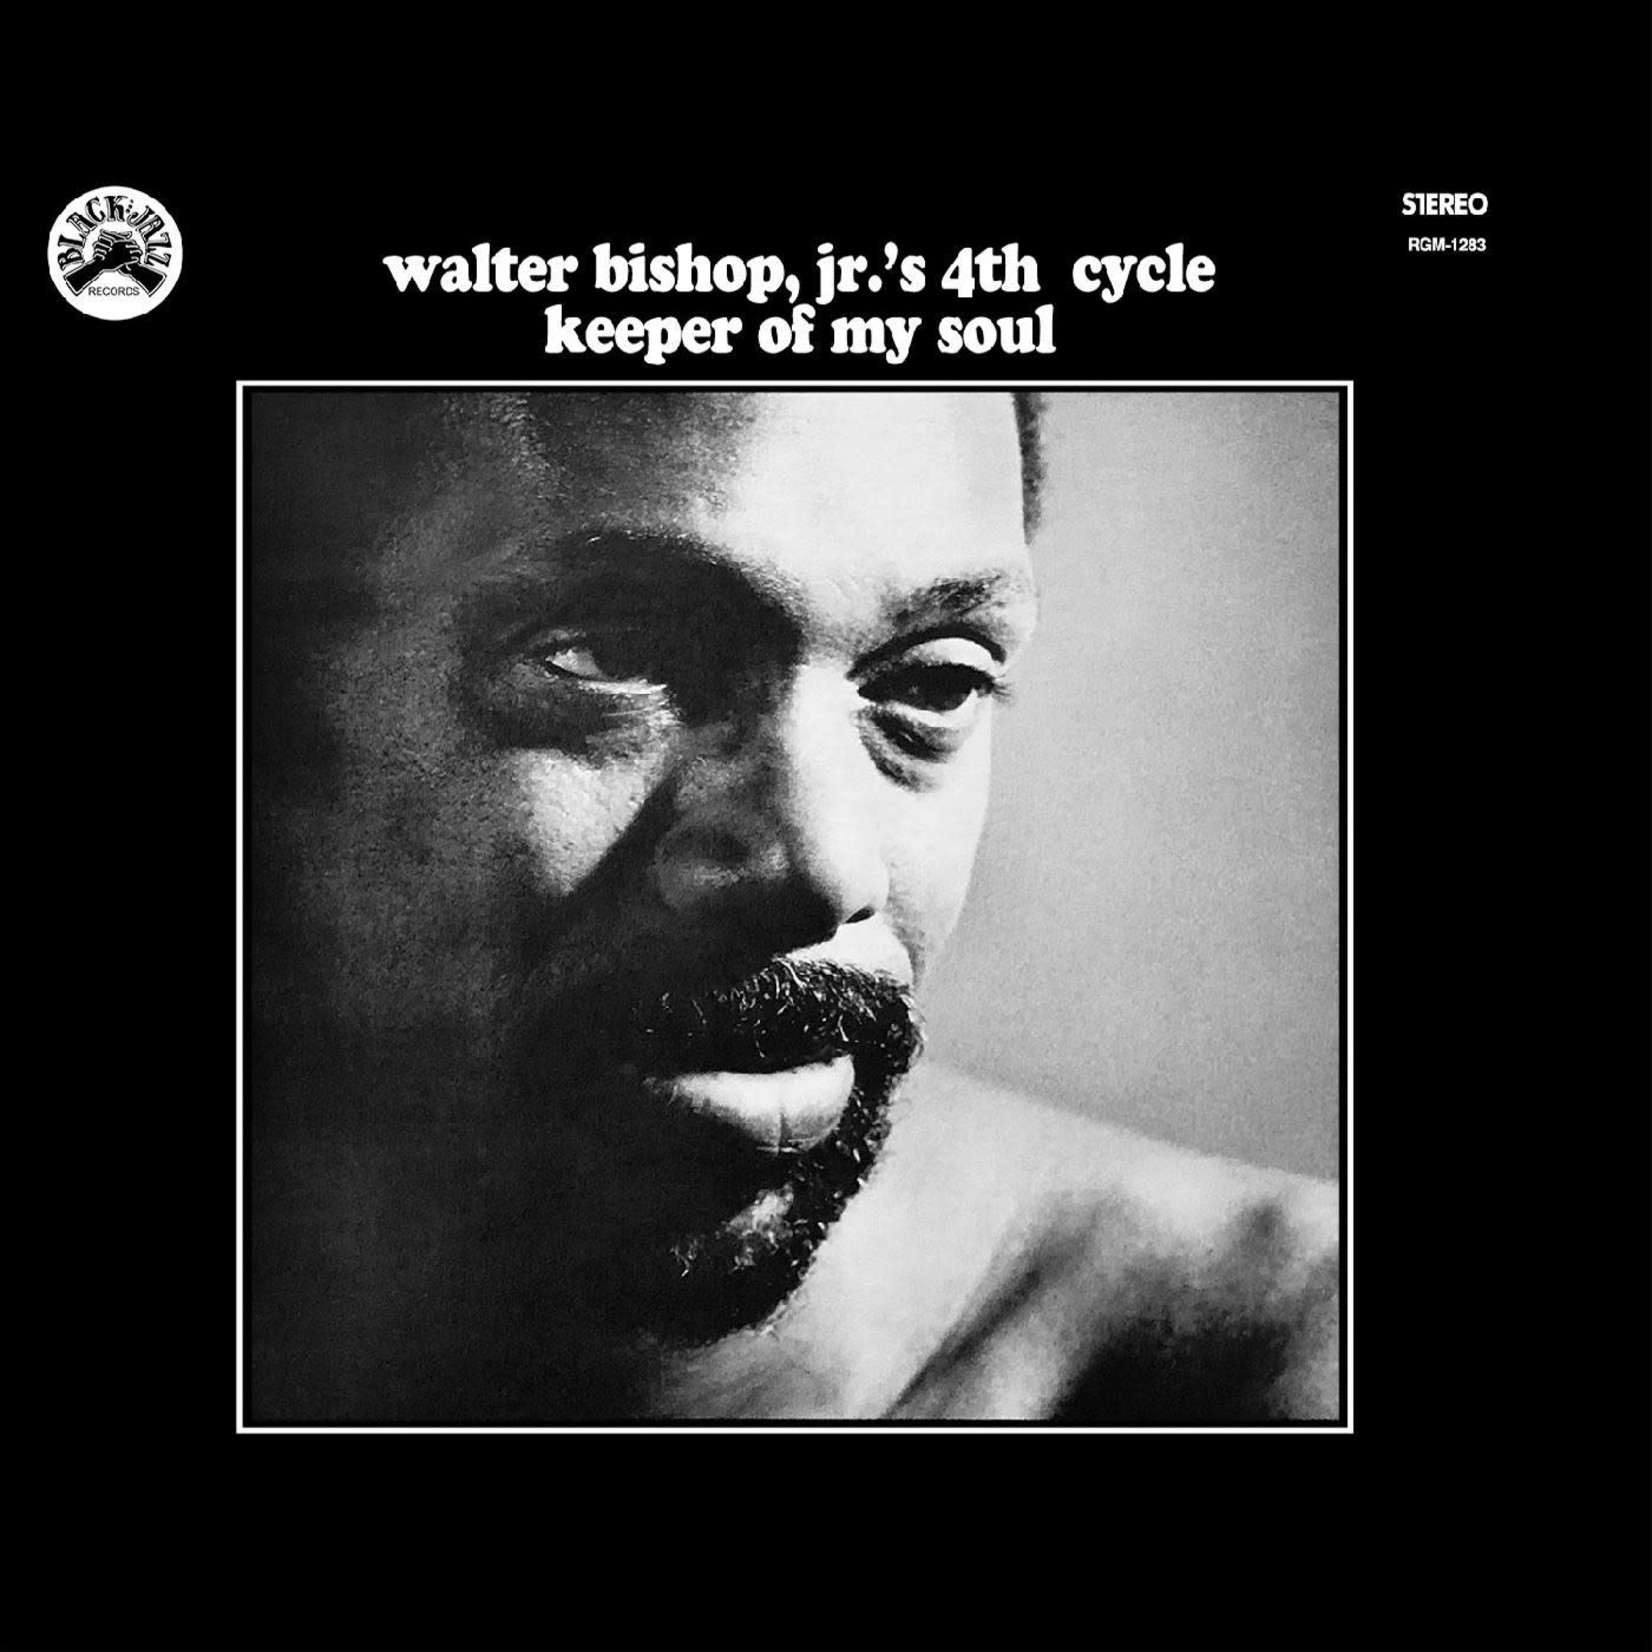 [New] Walter Bishop Jr.'s 4th Cycle: Keeper Of My Soul (remastered) [REAL GONE MUSIC]